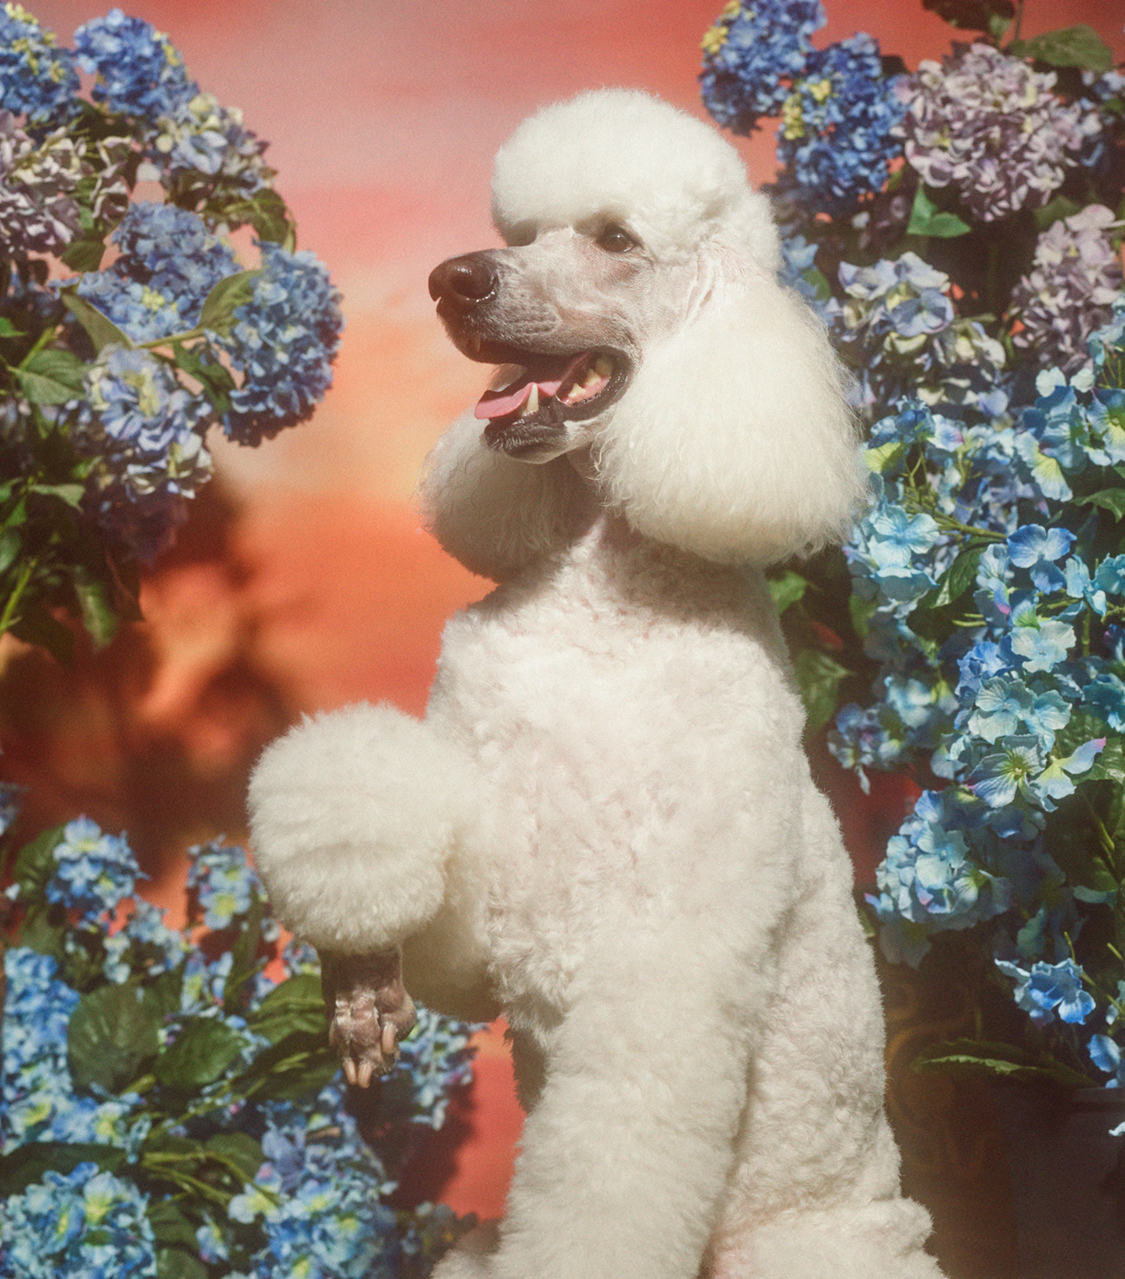 Gucci's 'Year of the Dog' campaign is here and it's fronted by